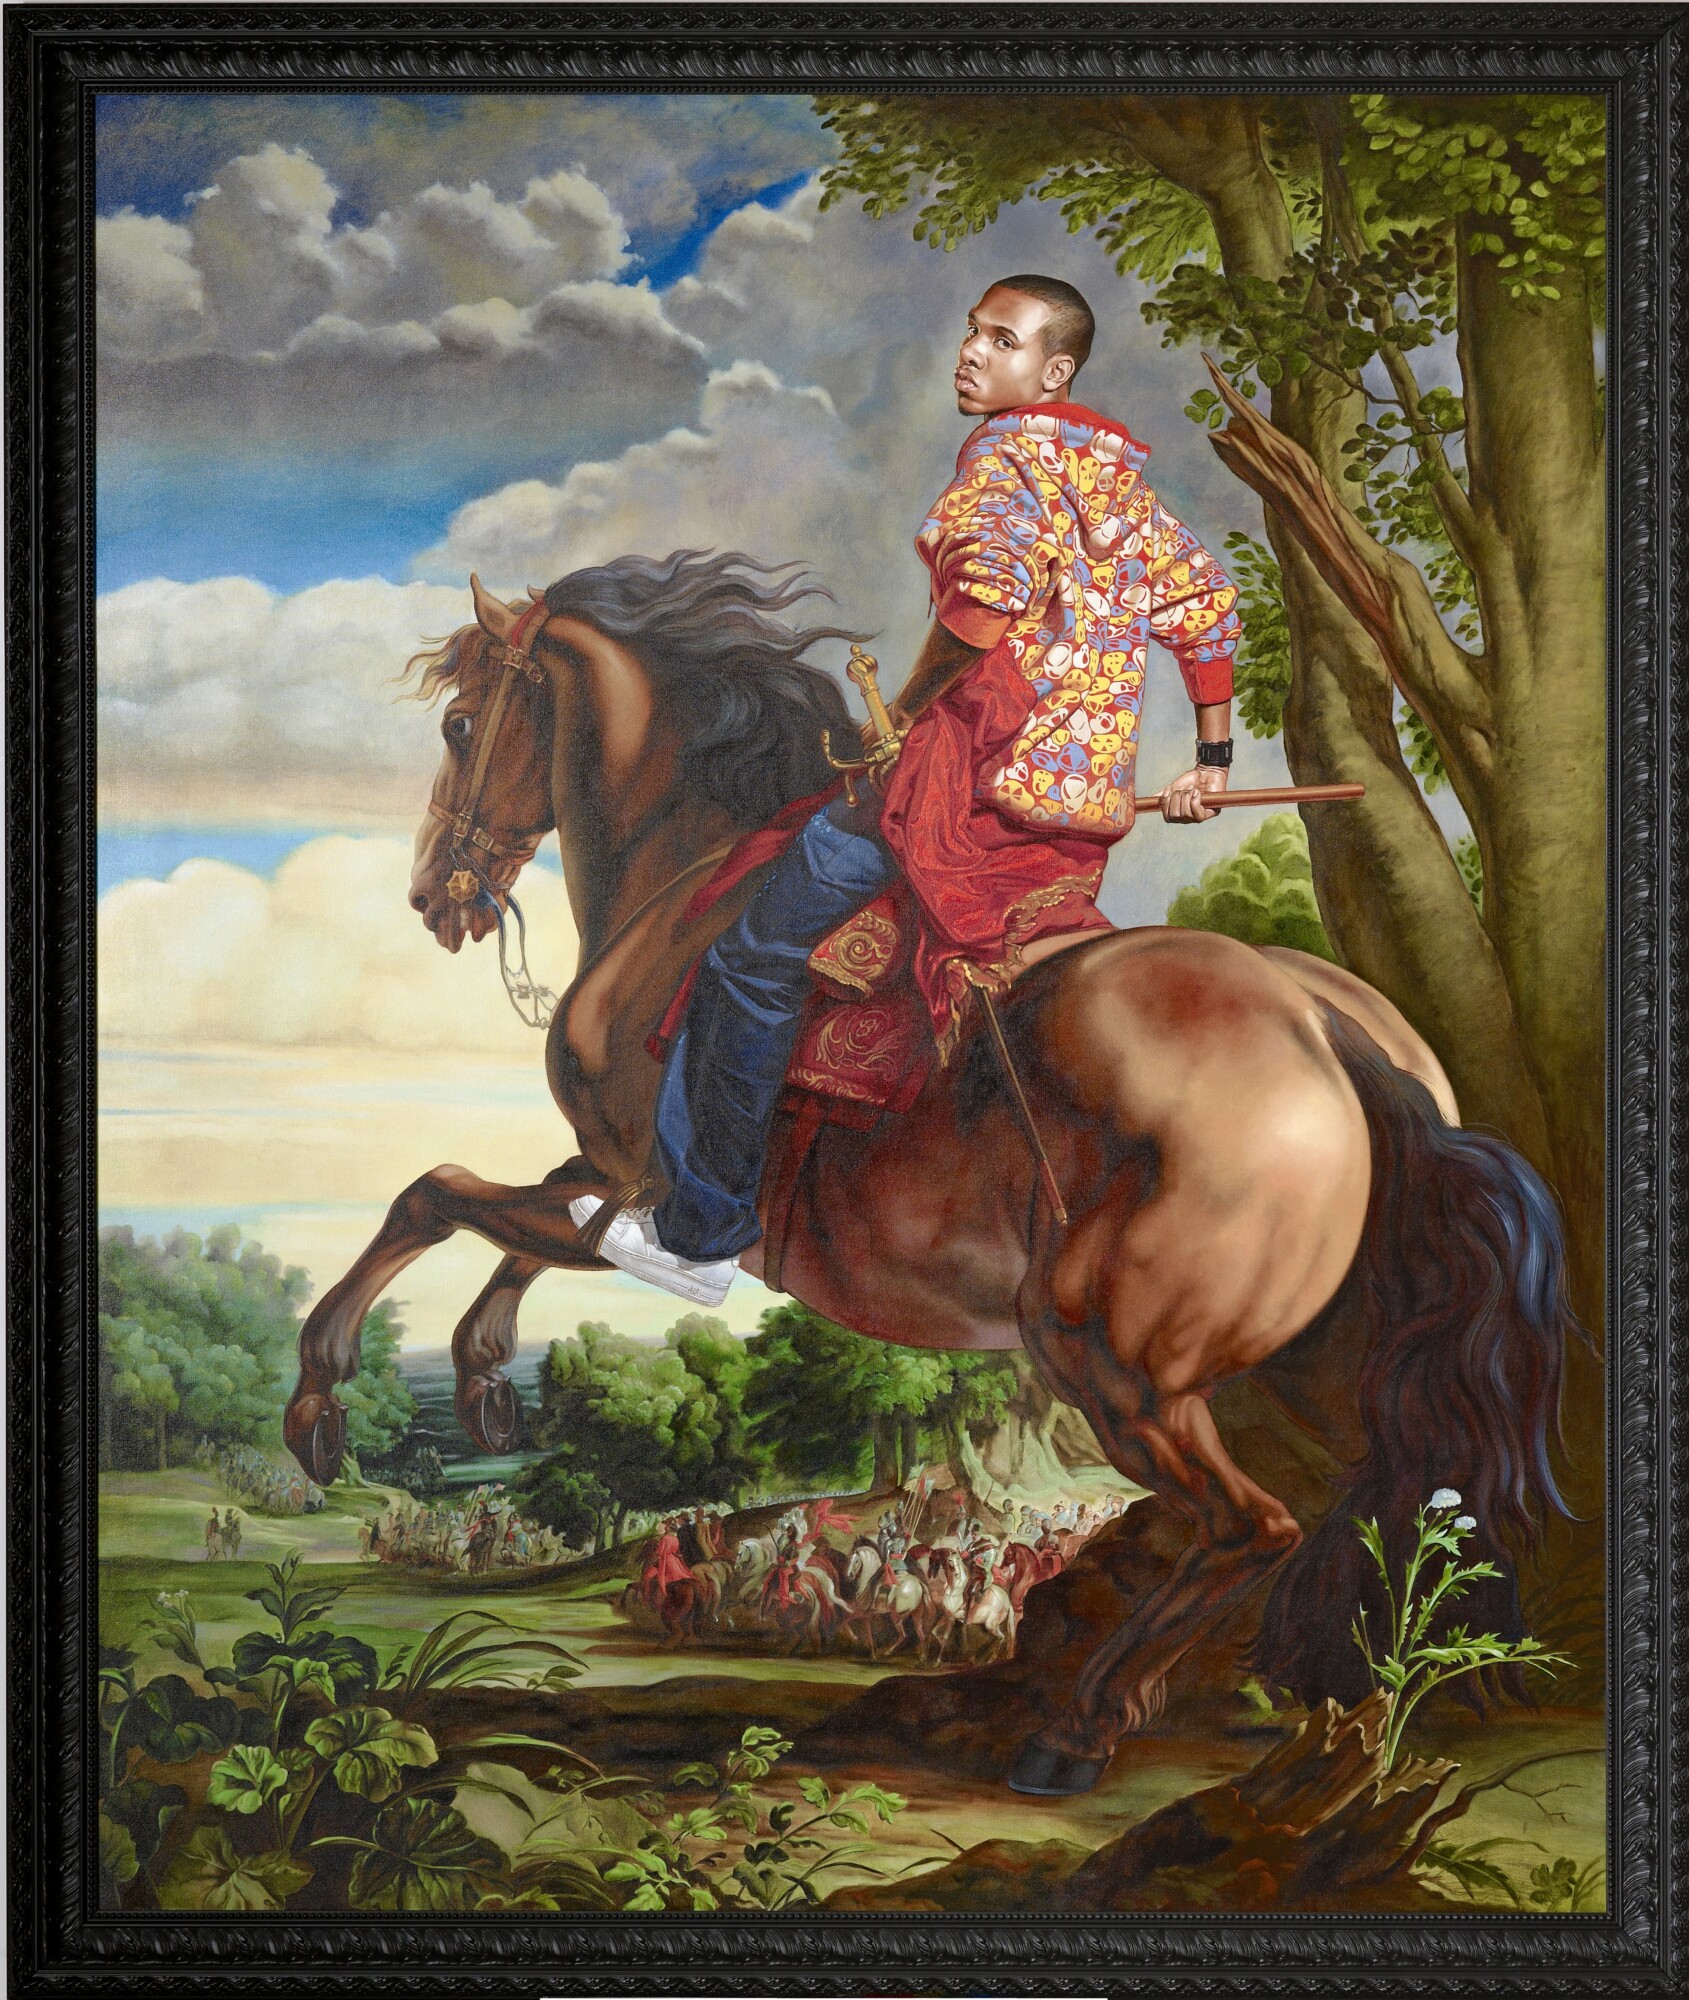 kehindewiley_a new republic_Duc d’Arenberg